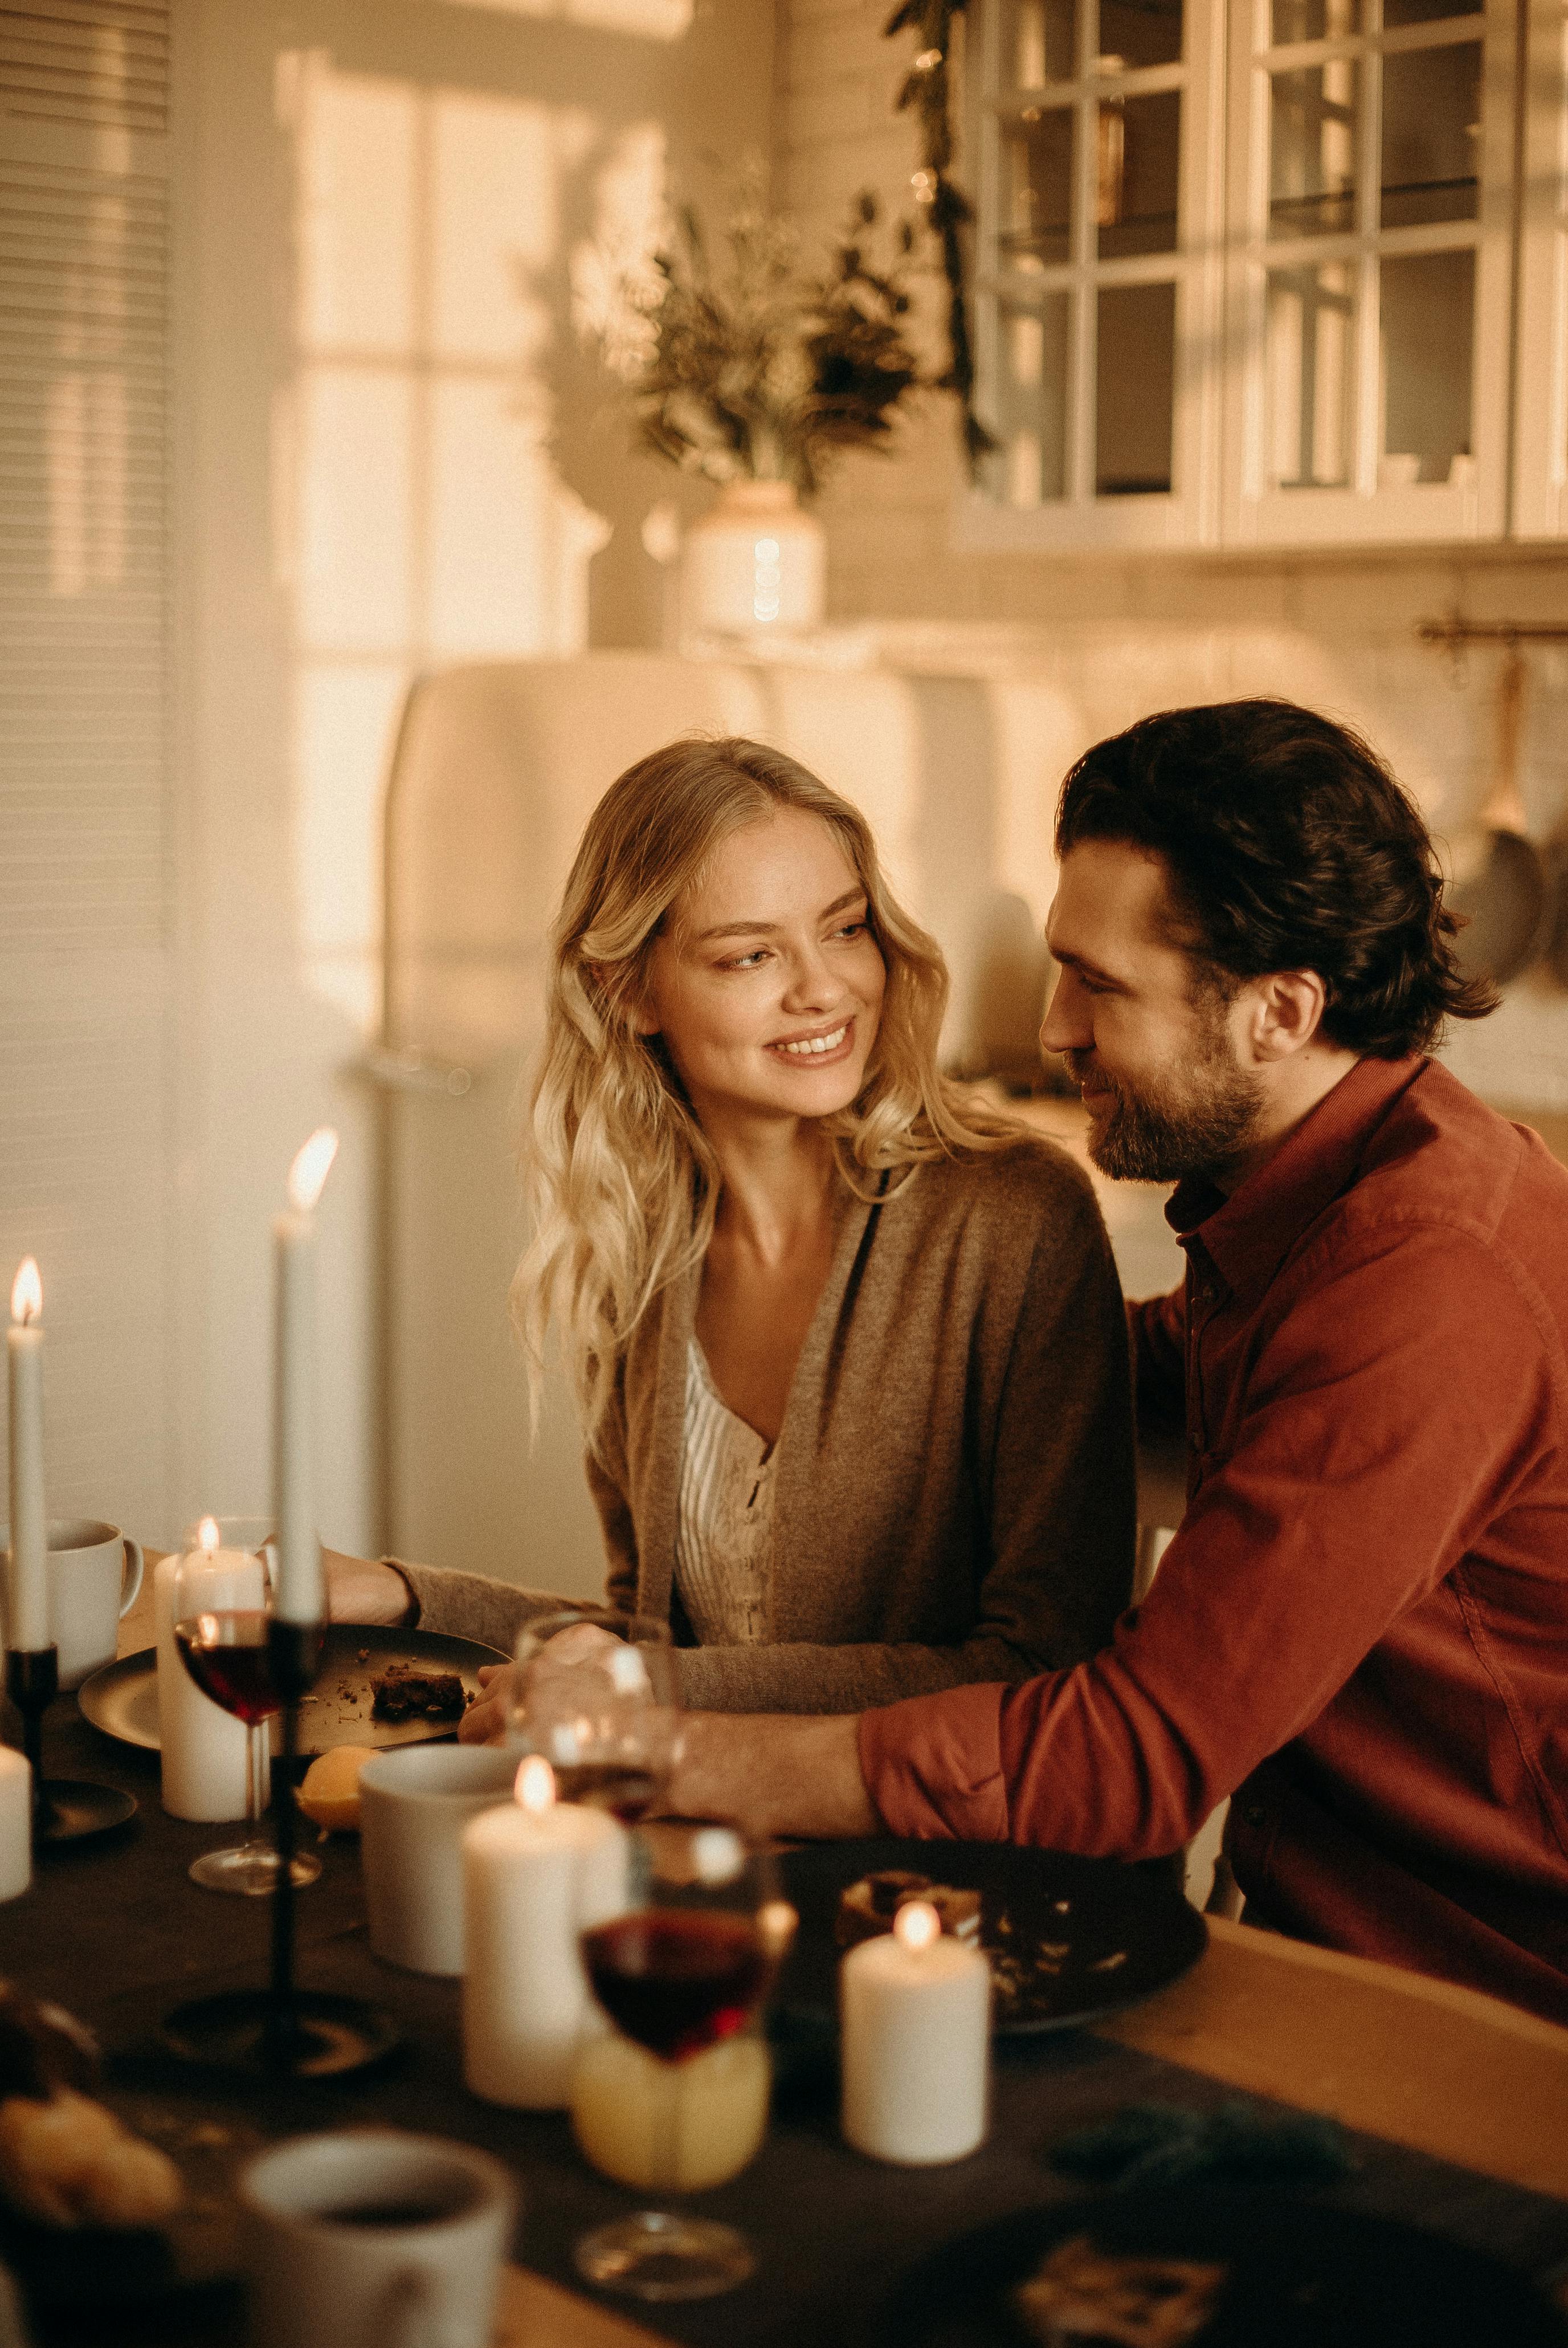 Man and blonde woman in a dining room | Source: Pexels